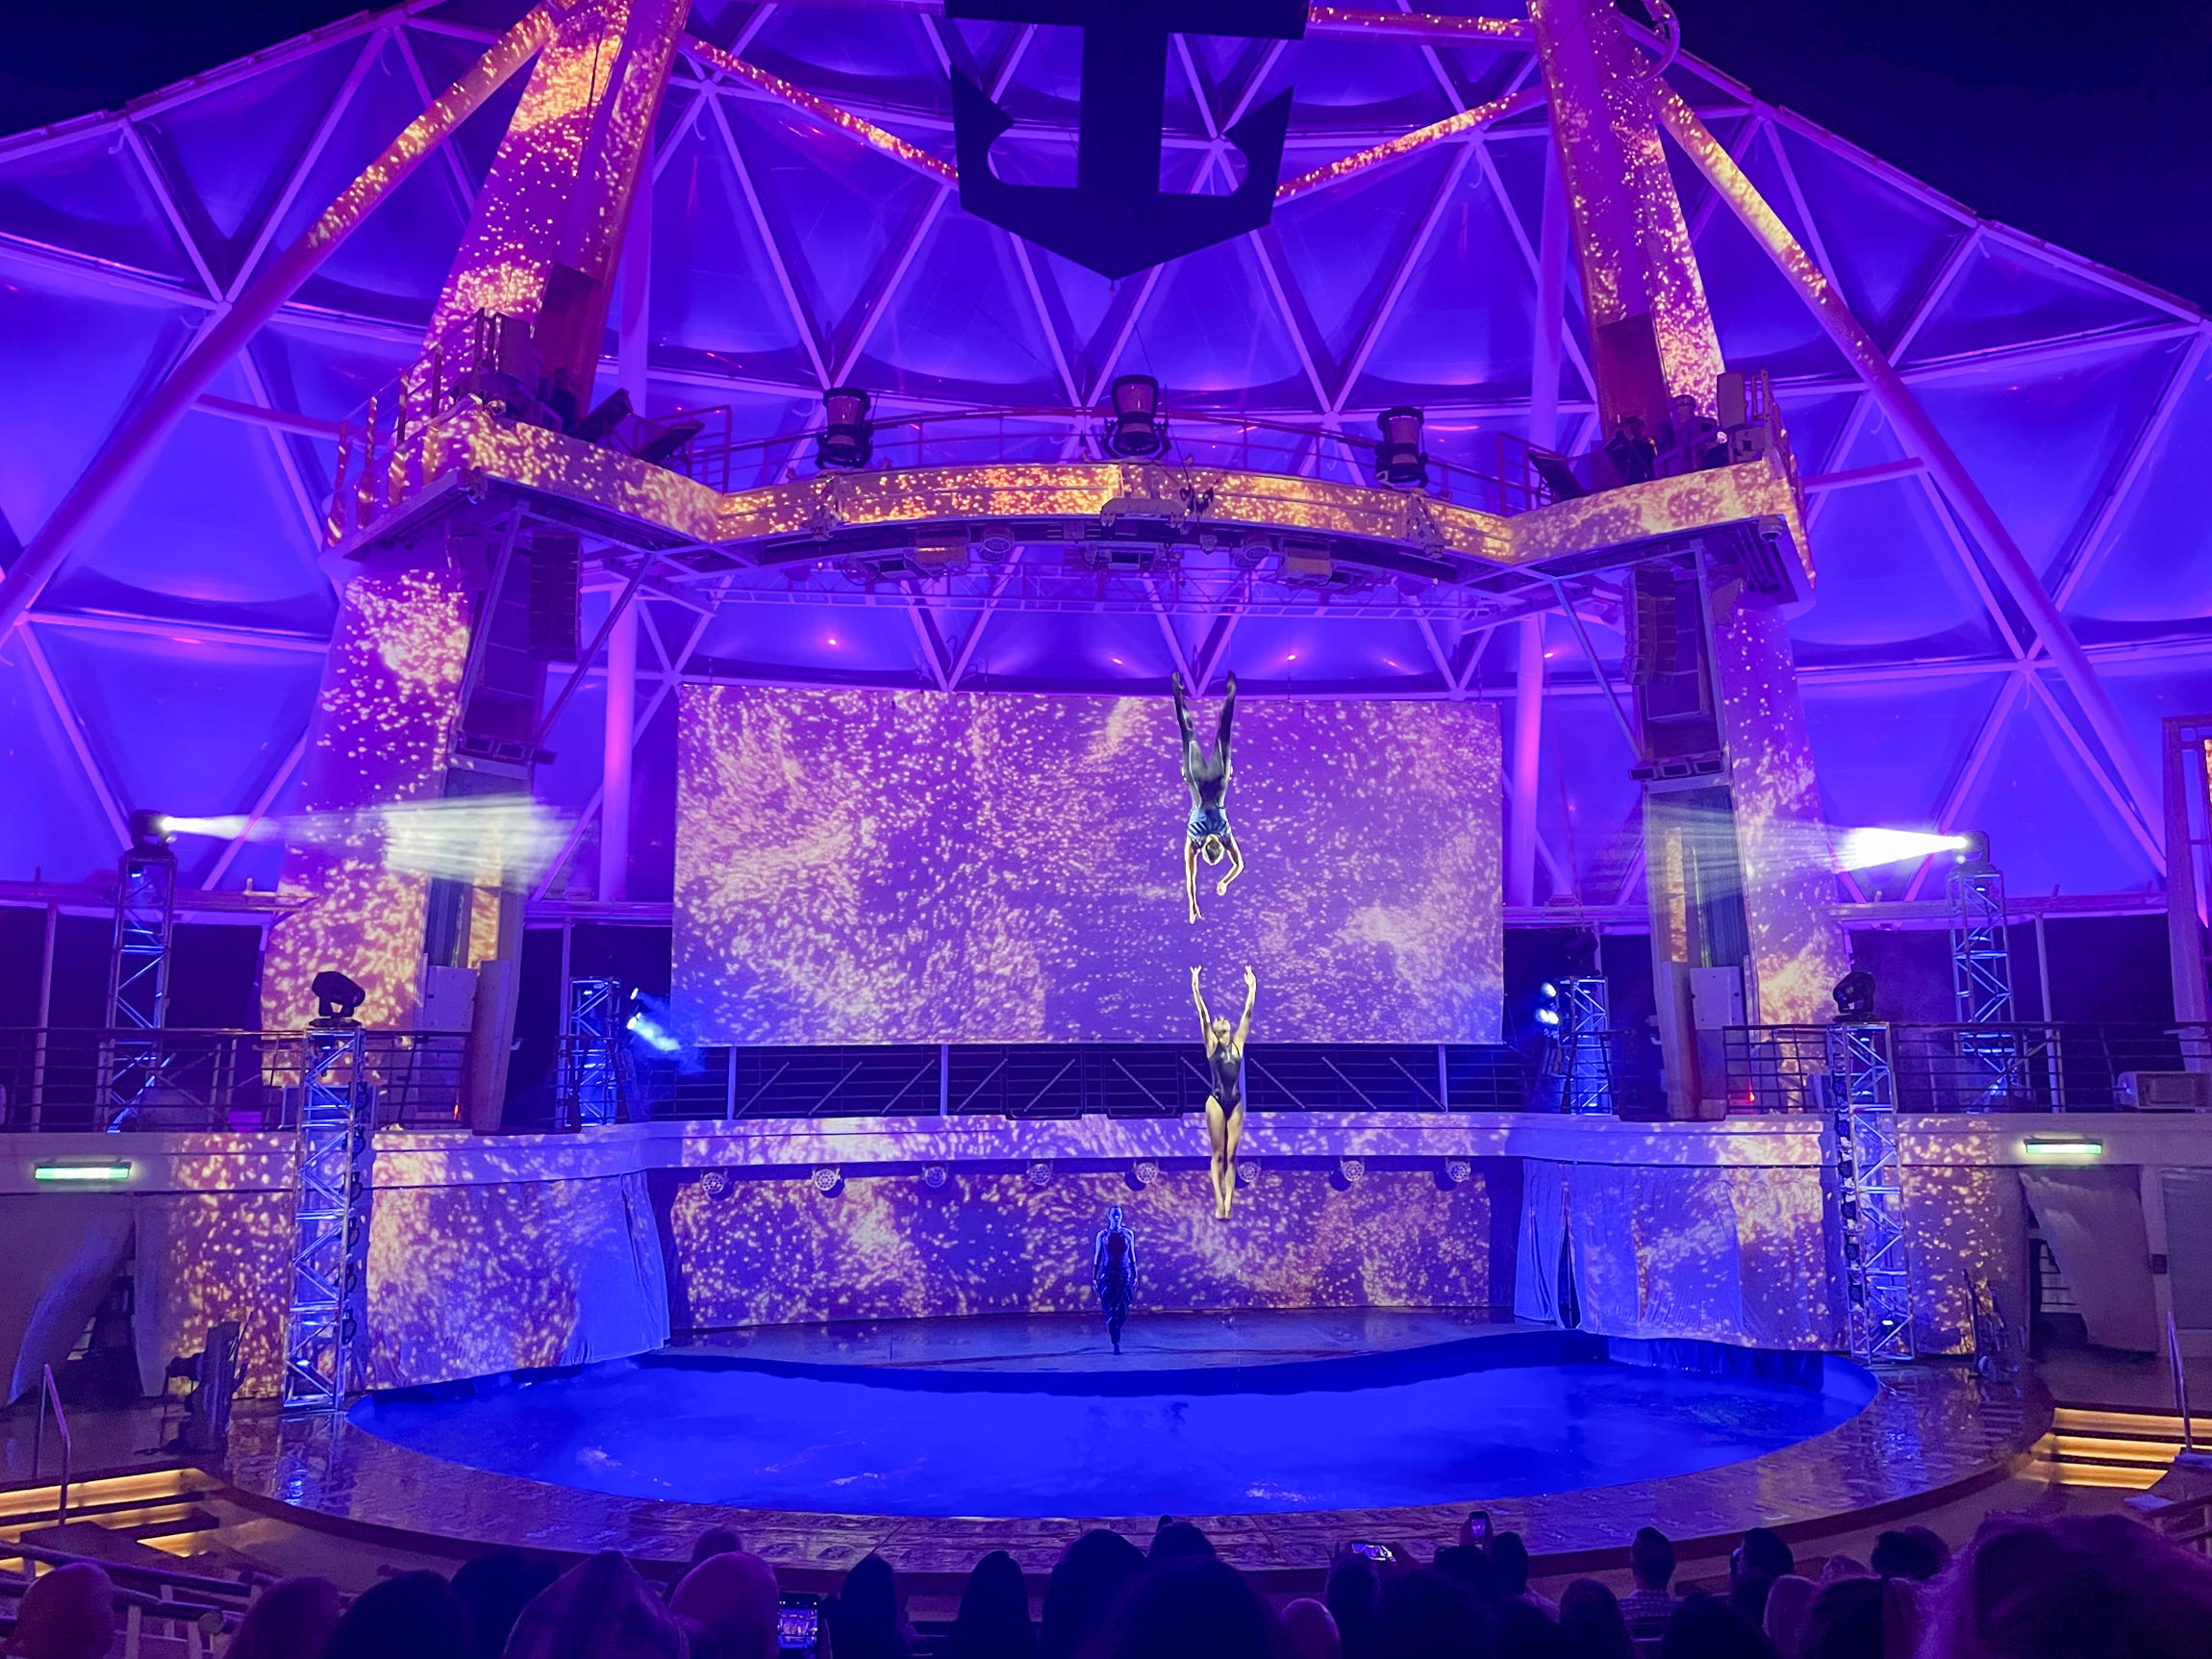 <p>The performers bounced between two stage platforms that rose and sank into the pool, the first I've seen on a ship.</p><p>It's one of the few times I didn't want to leave halfway through a cruise show.</p>